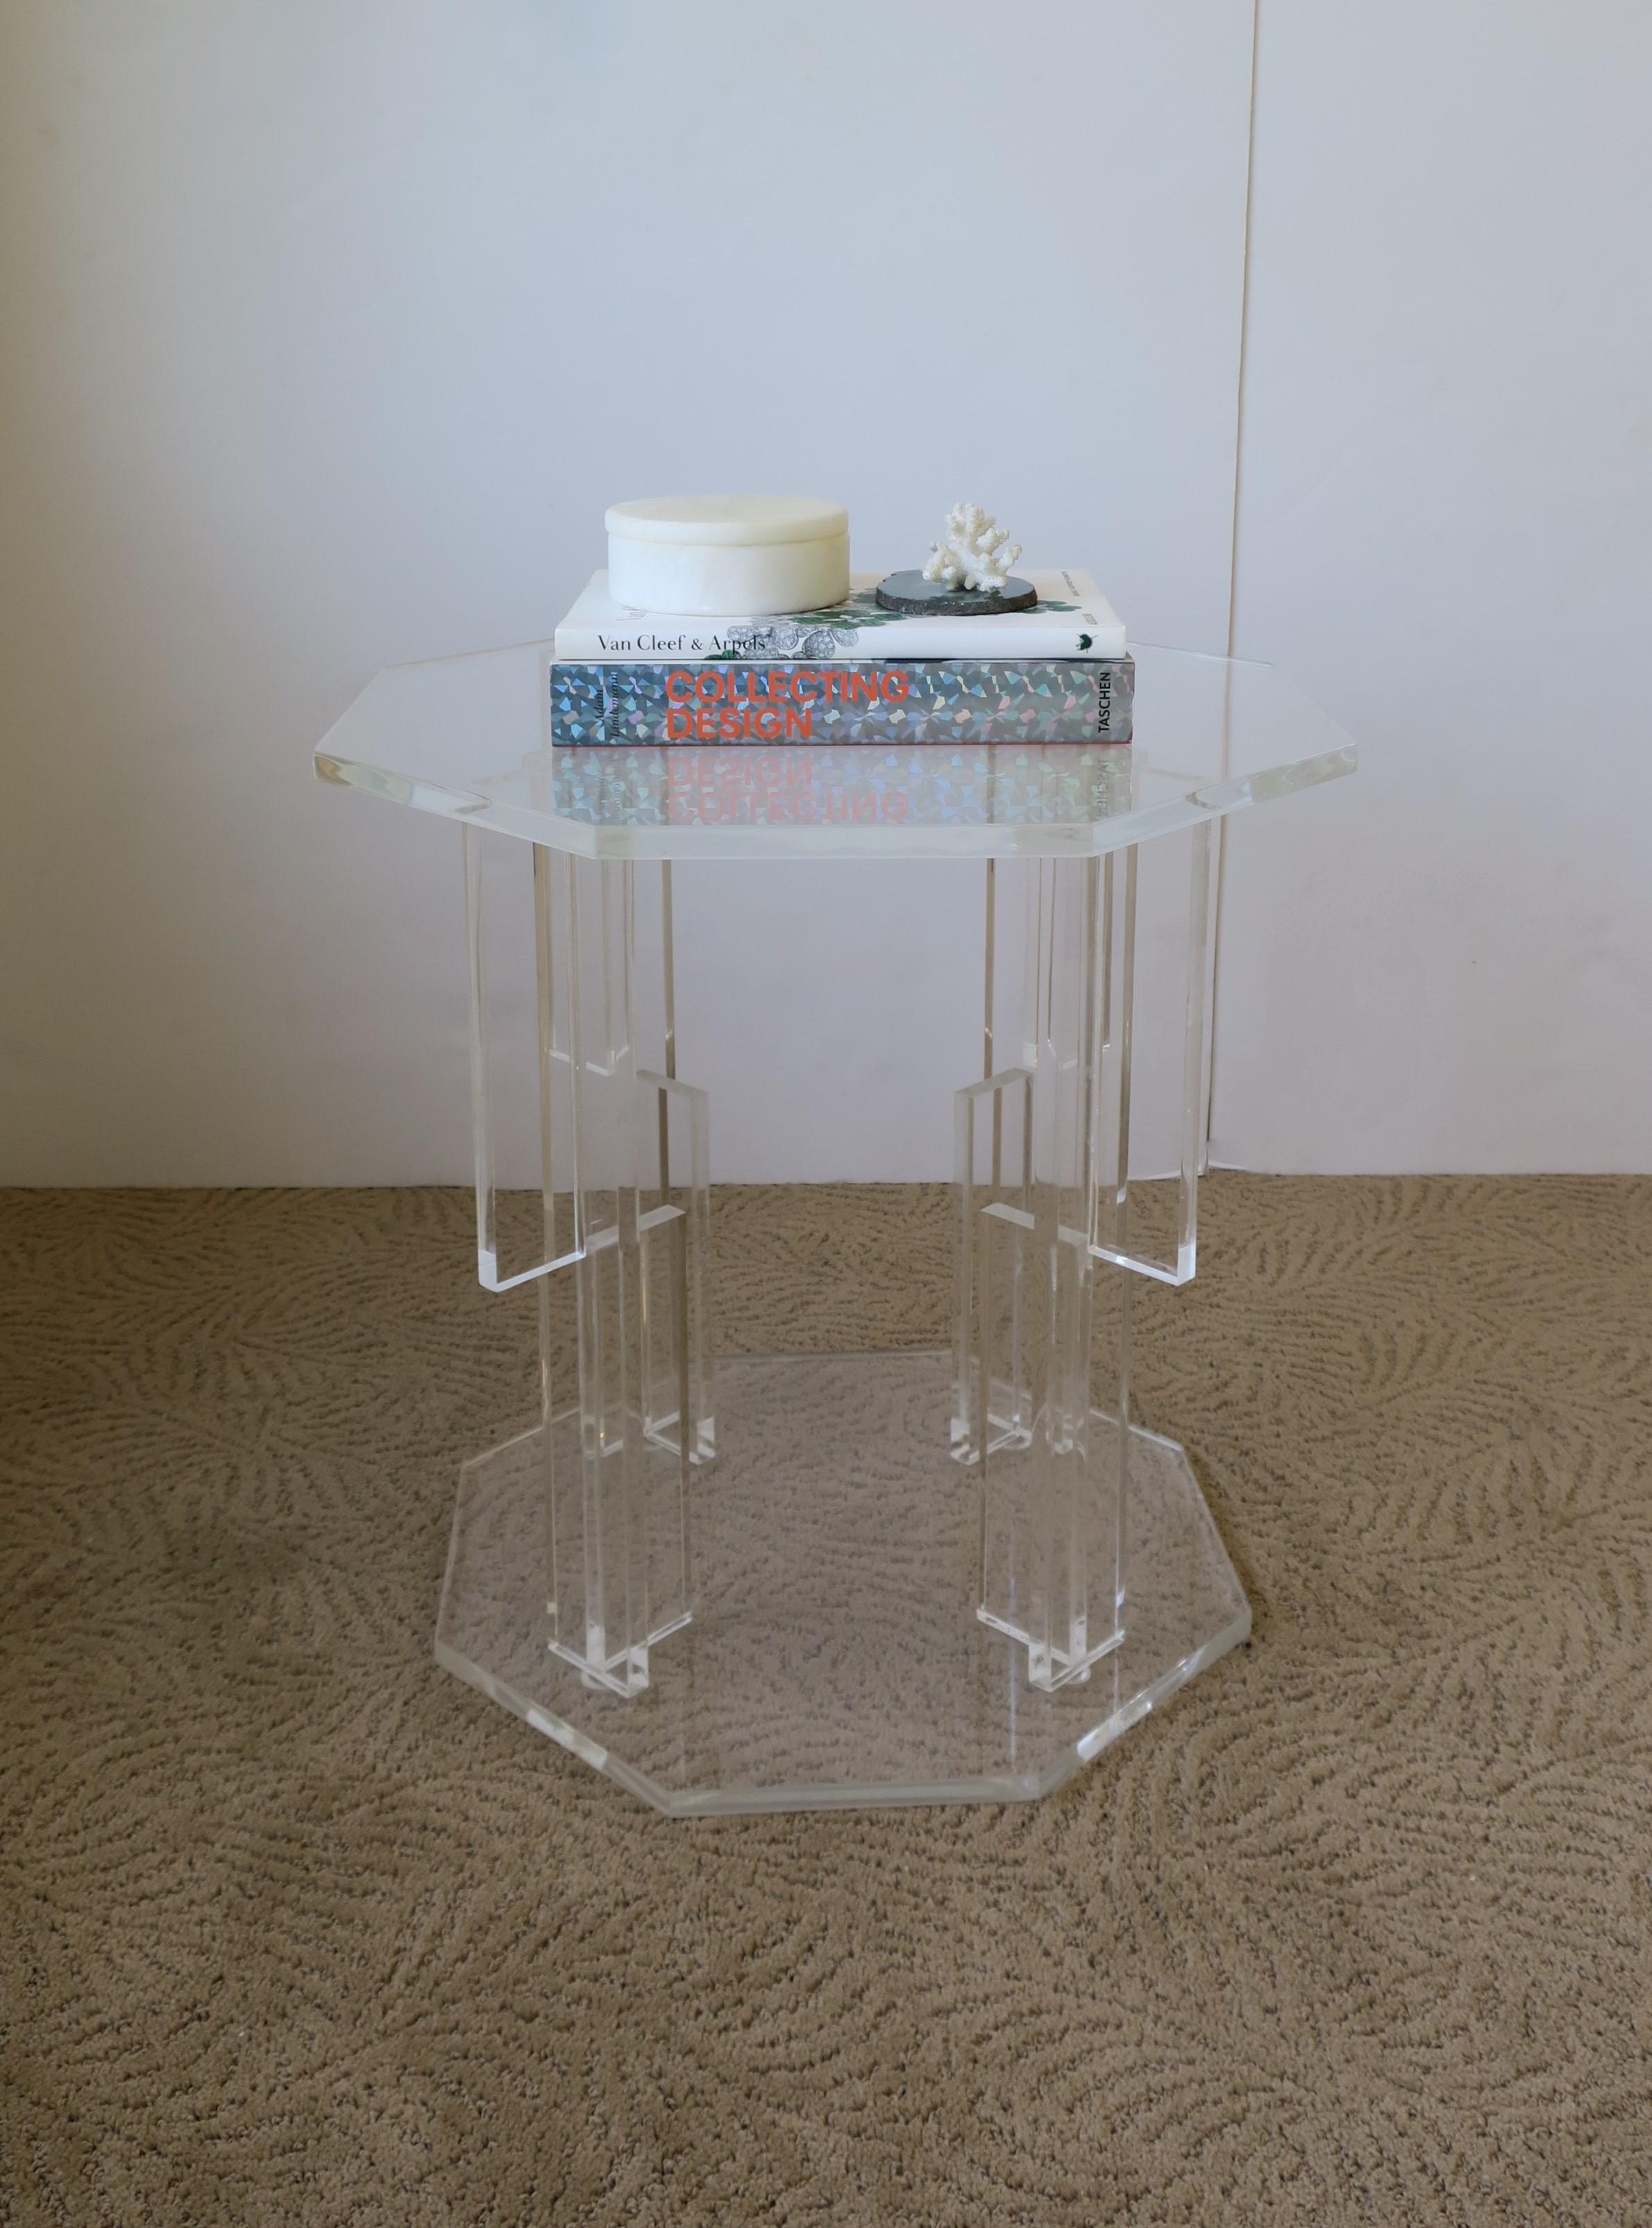 A substantial, small, Modern style clear acrylic side or drinks table with octagonal top and base and decorative geometric legs/center area. The octagonal design is a nice alternative to round. 

Table measures: 16